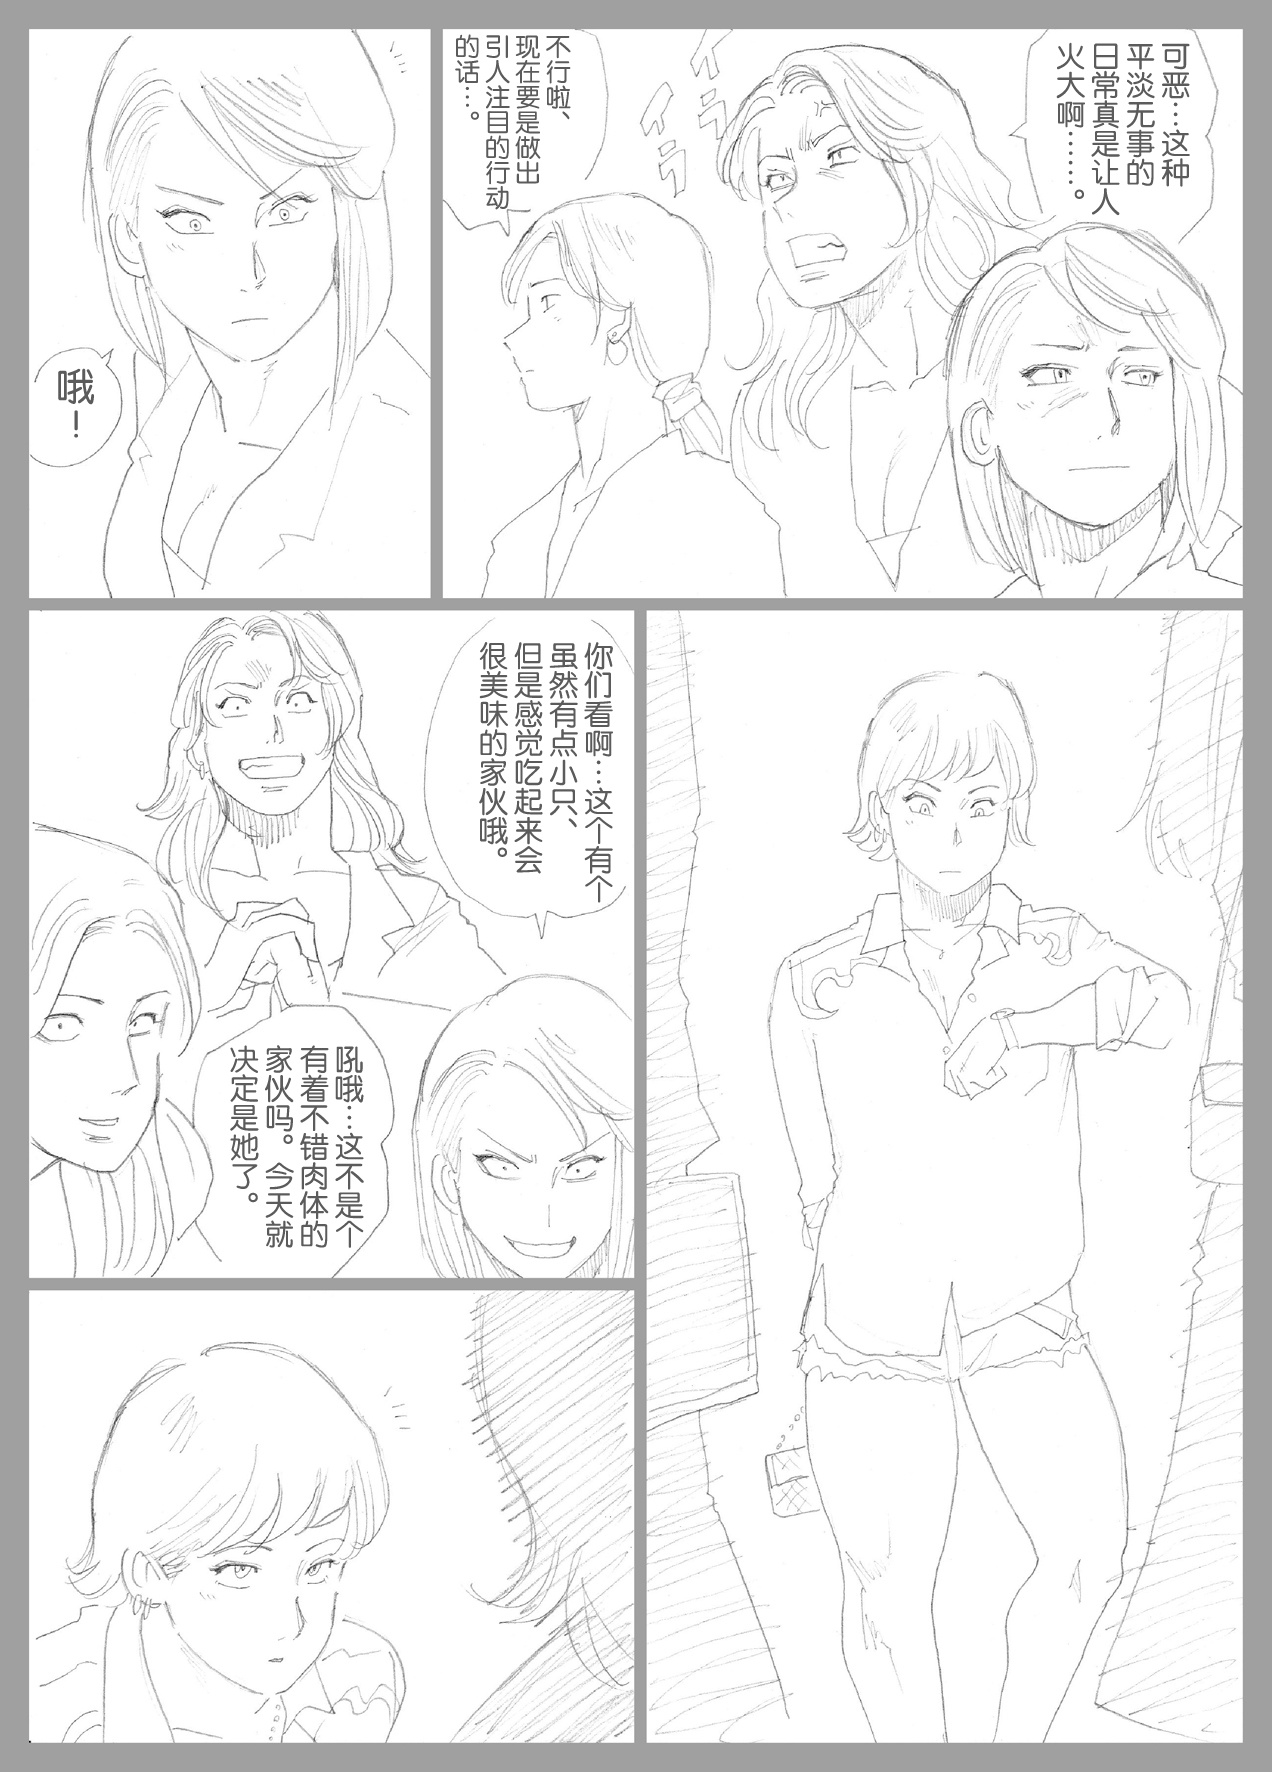 [Urban Doujin Magazine] Mousou Tokusatsu Series Ultra Madam 9 (another end) [Chinese] [不咕鸟汉化组] page 26 full